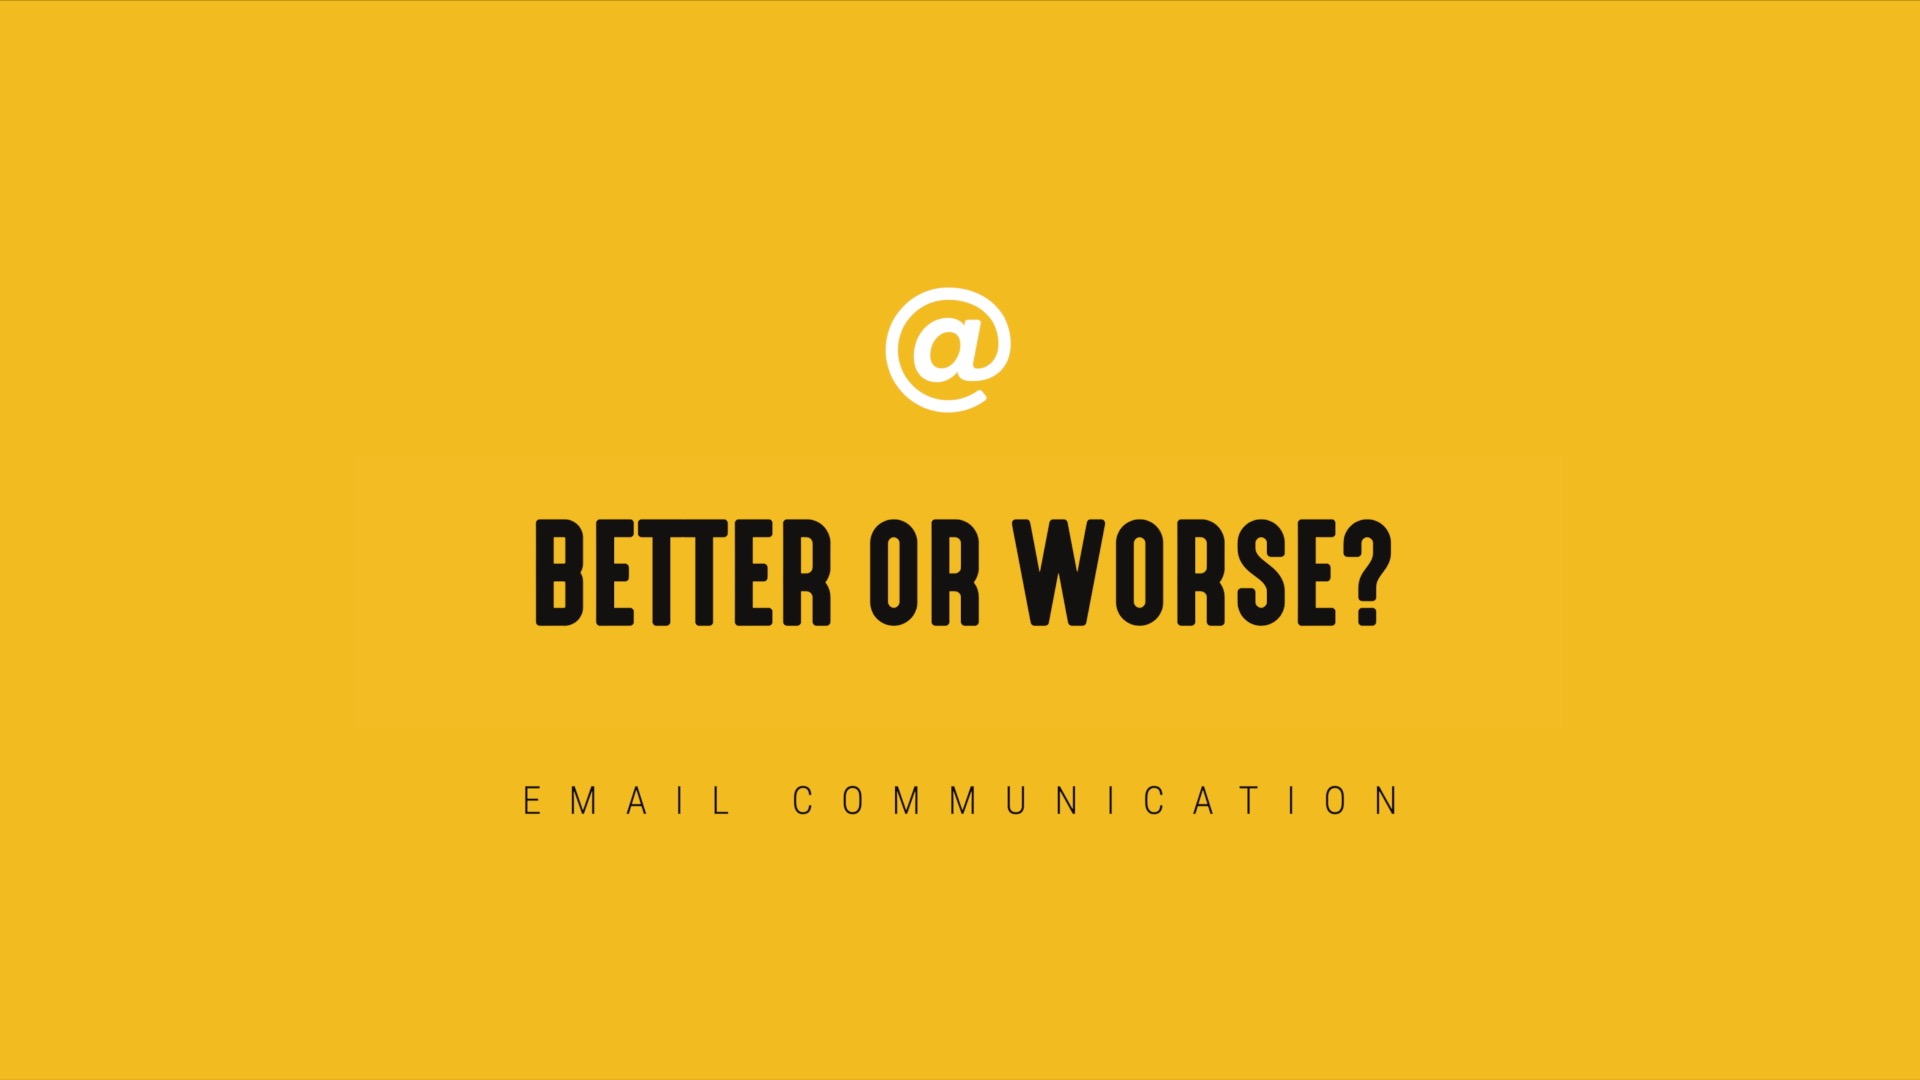 [NEW] Timely Email - Better or Worse?